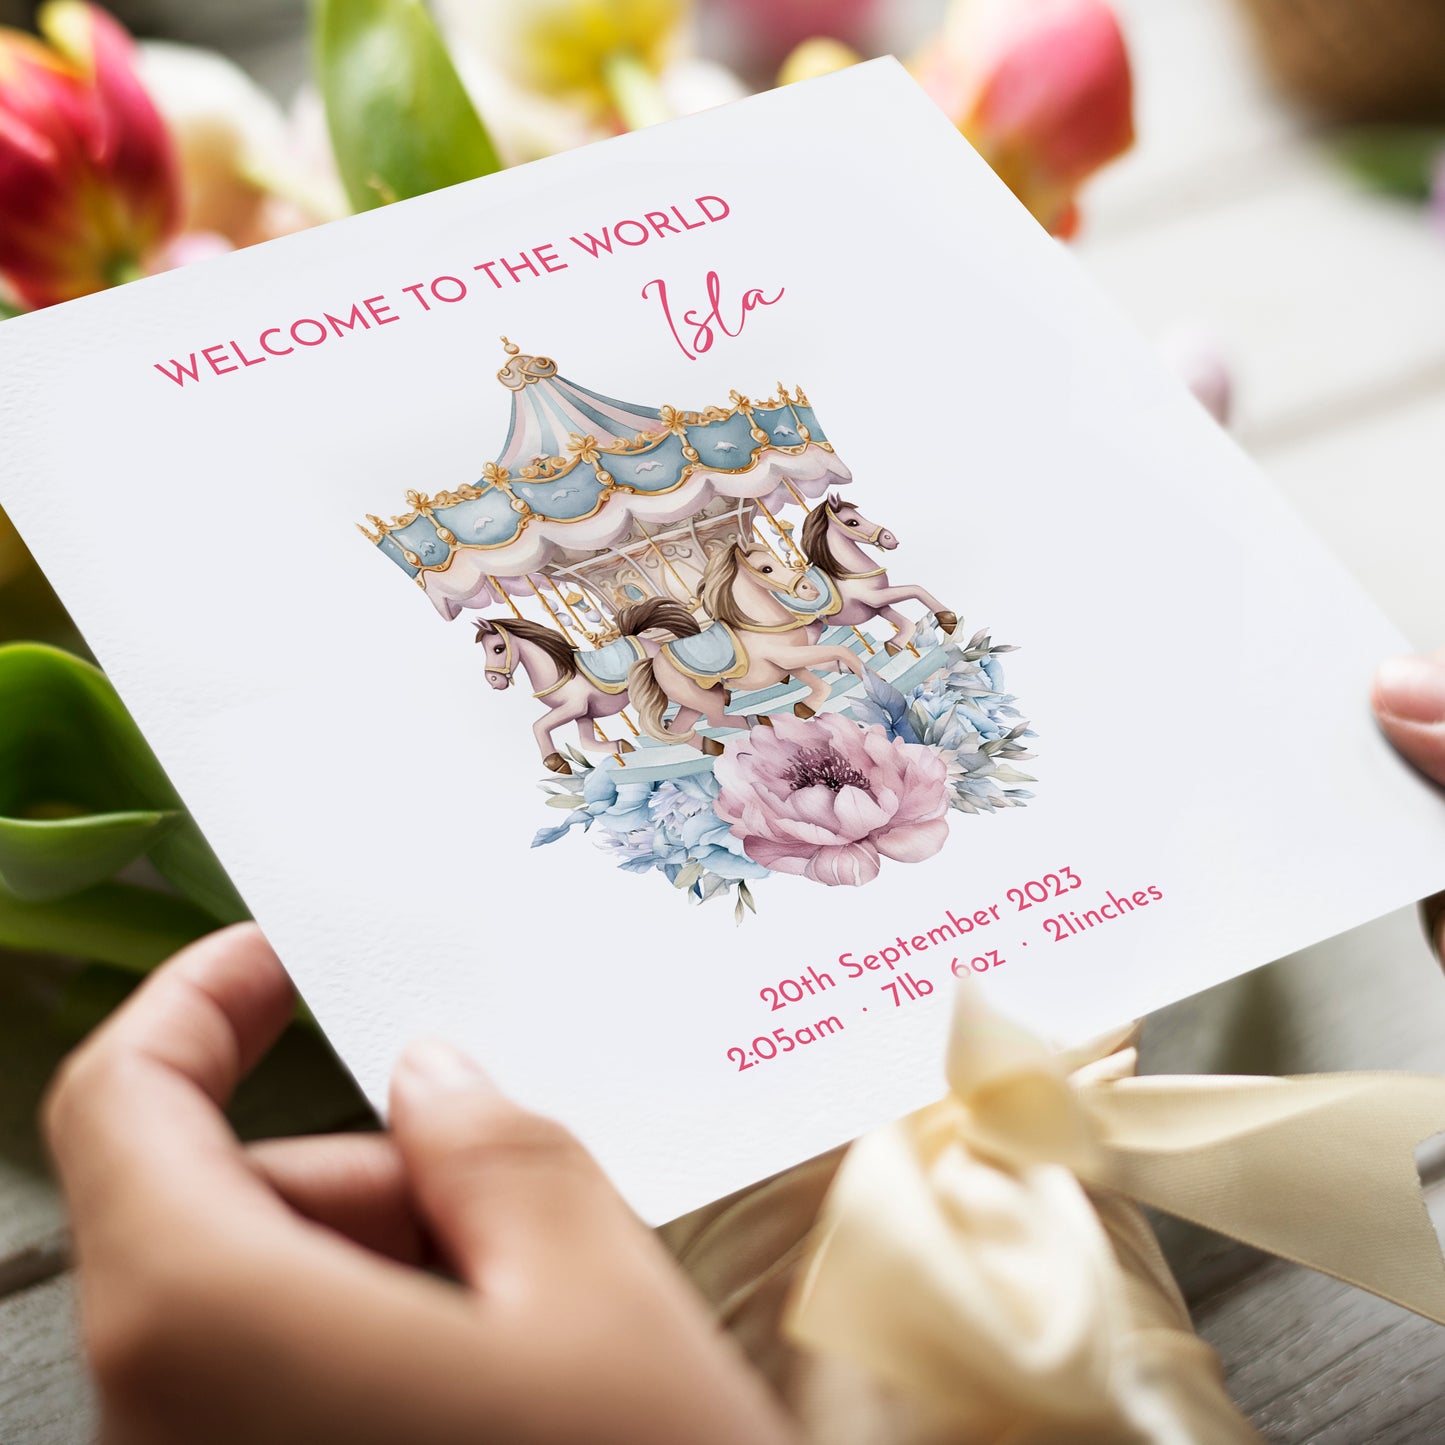 Welcome to the World Baby Girl Carousel Card